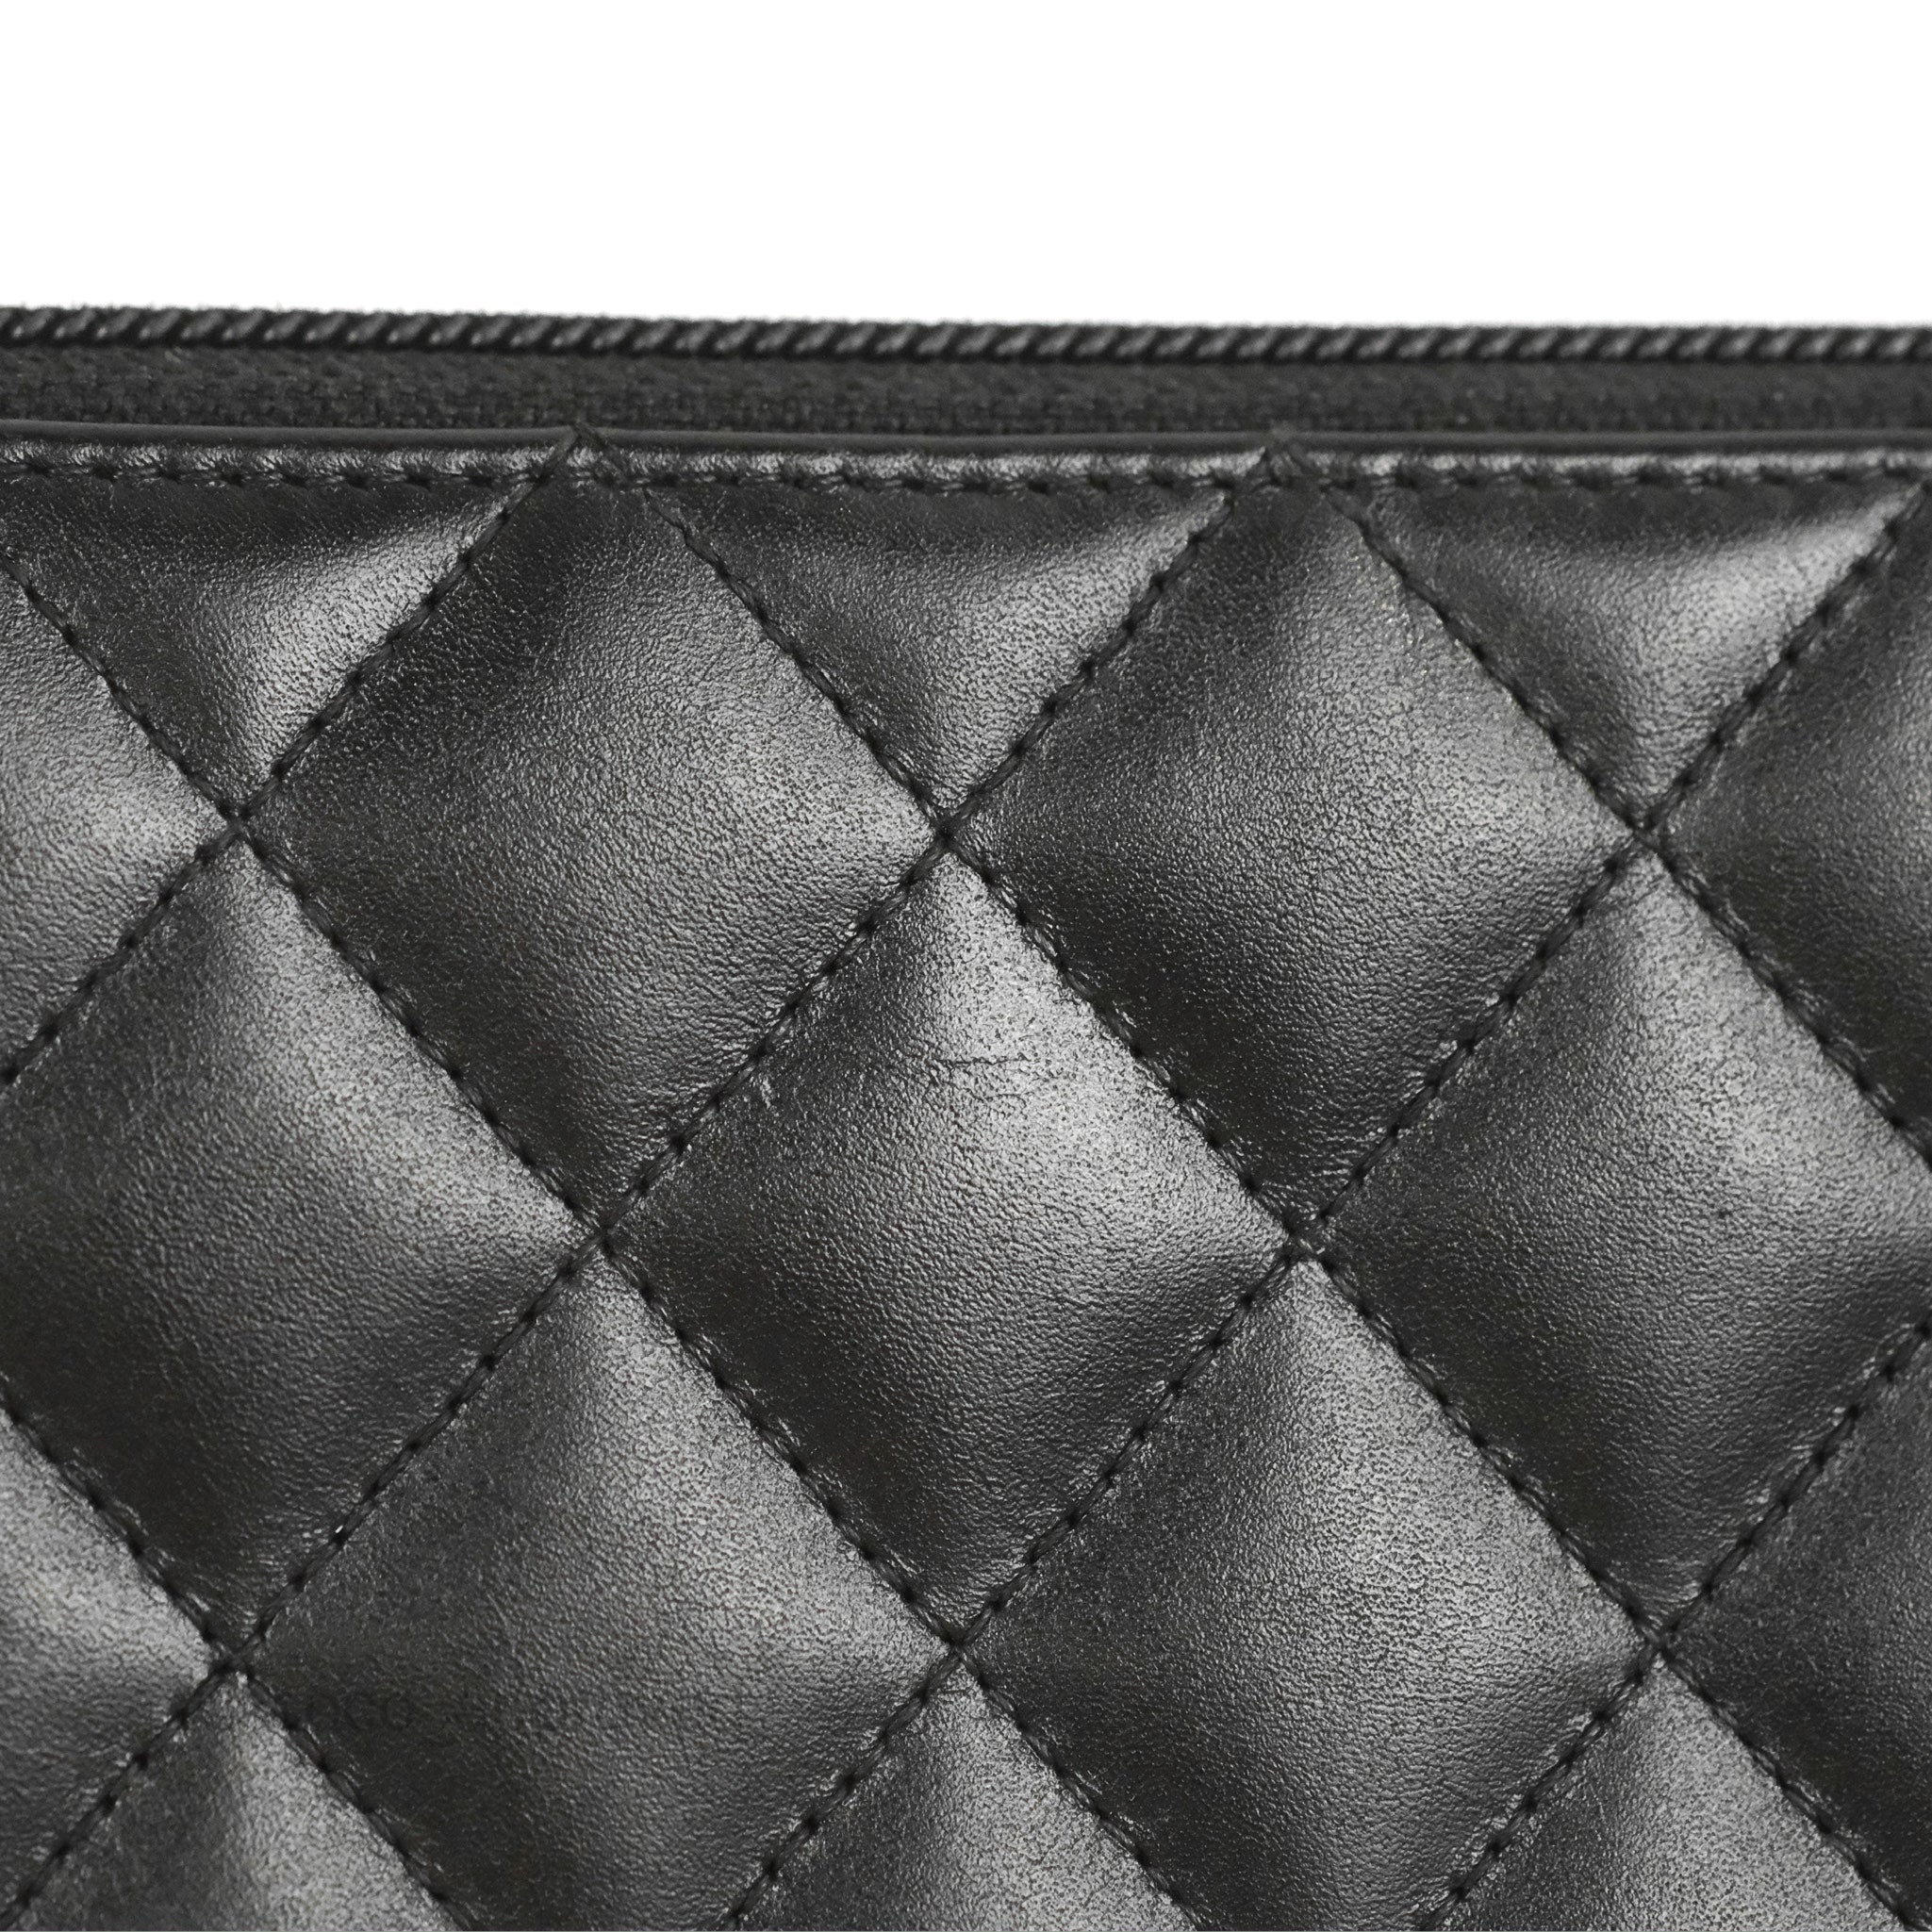 Chanel Quilted Cambon Yen Zip Long Wallet Black Calfskin Silver Hardwa – Coco  Approved Studio